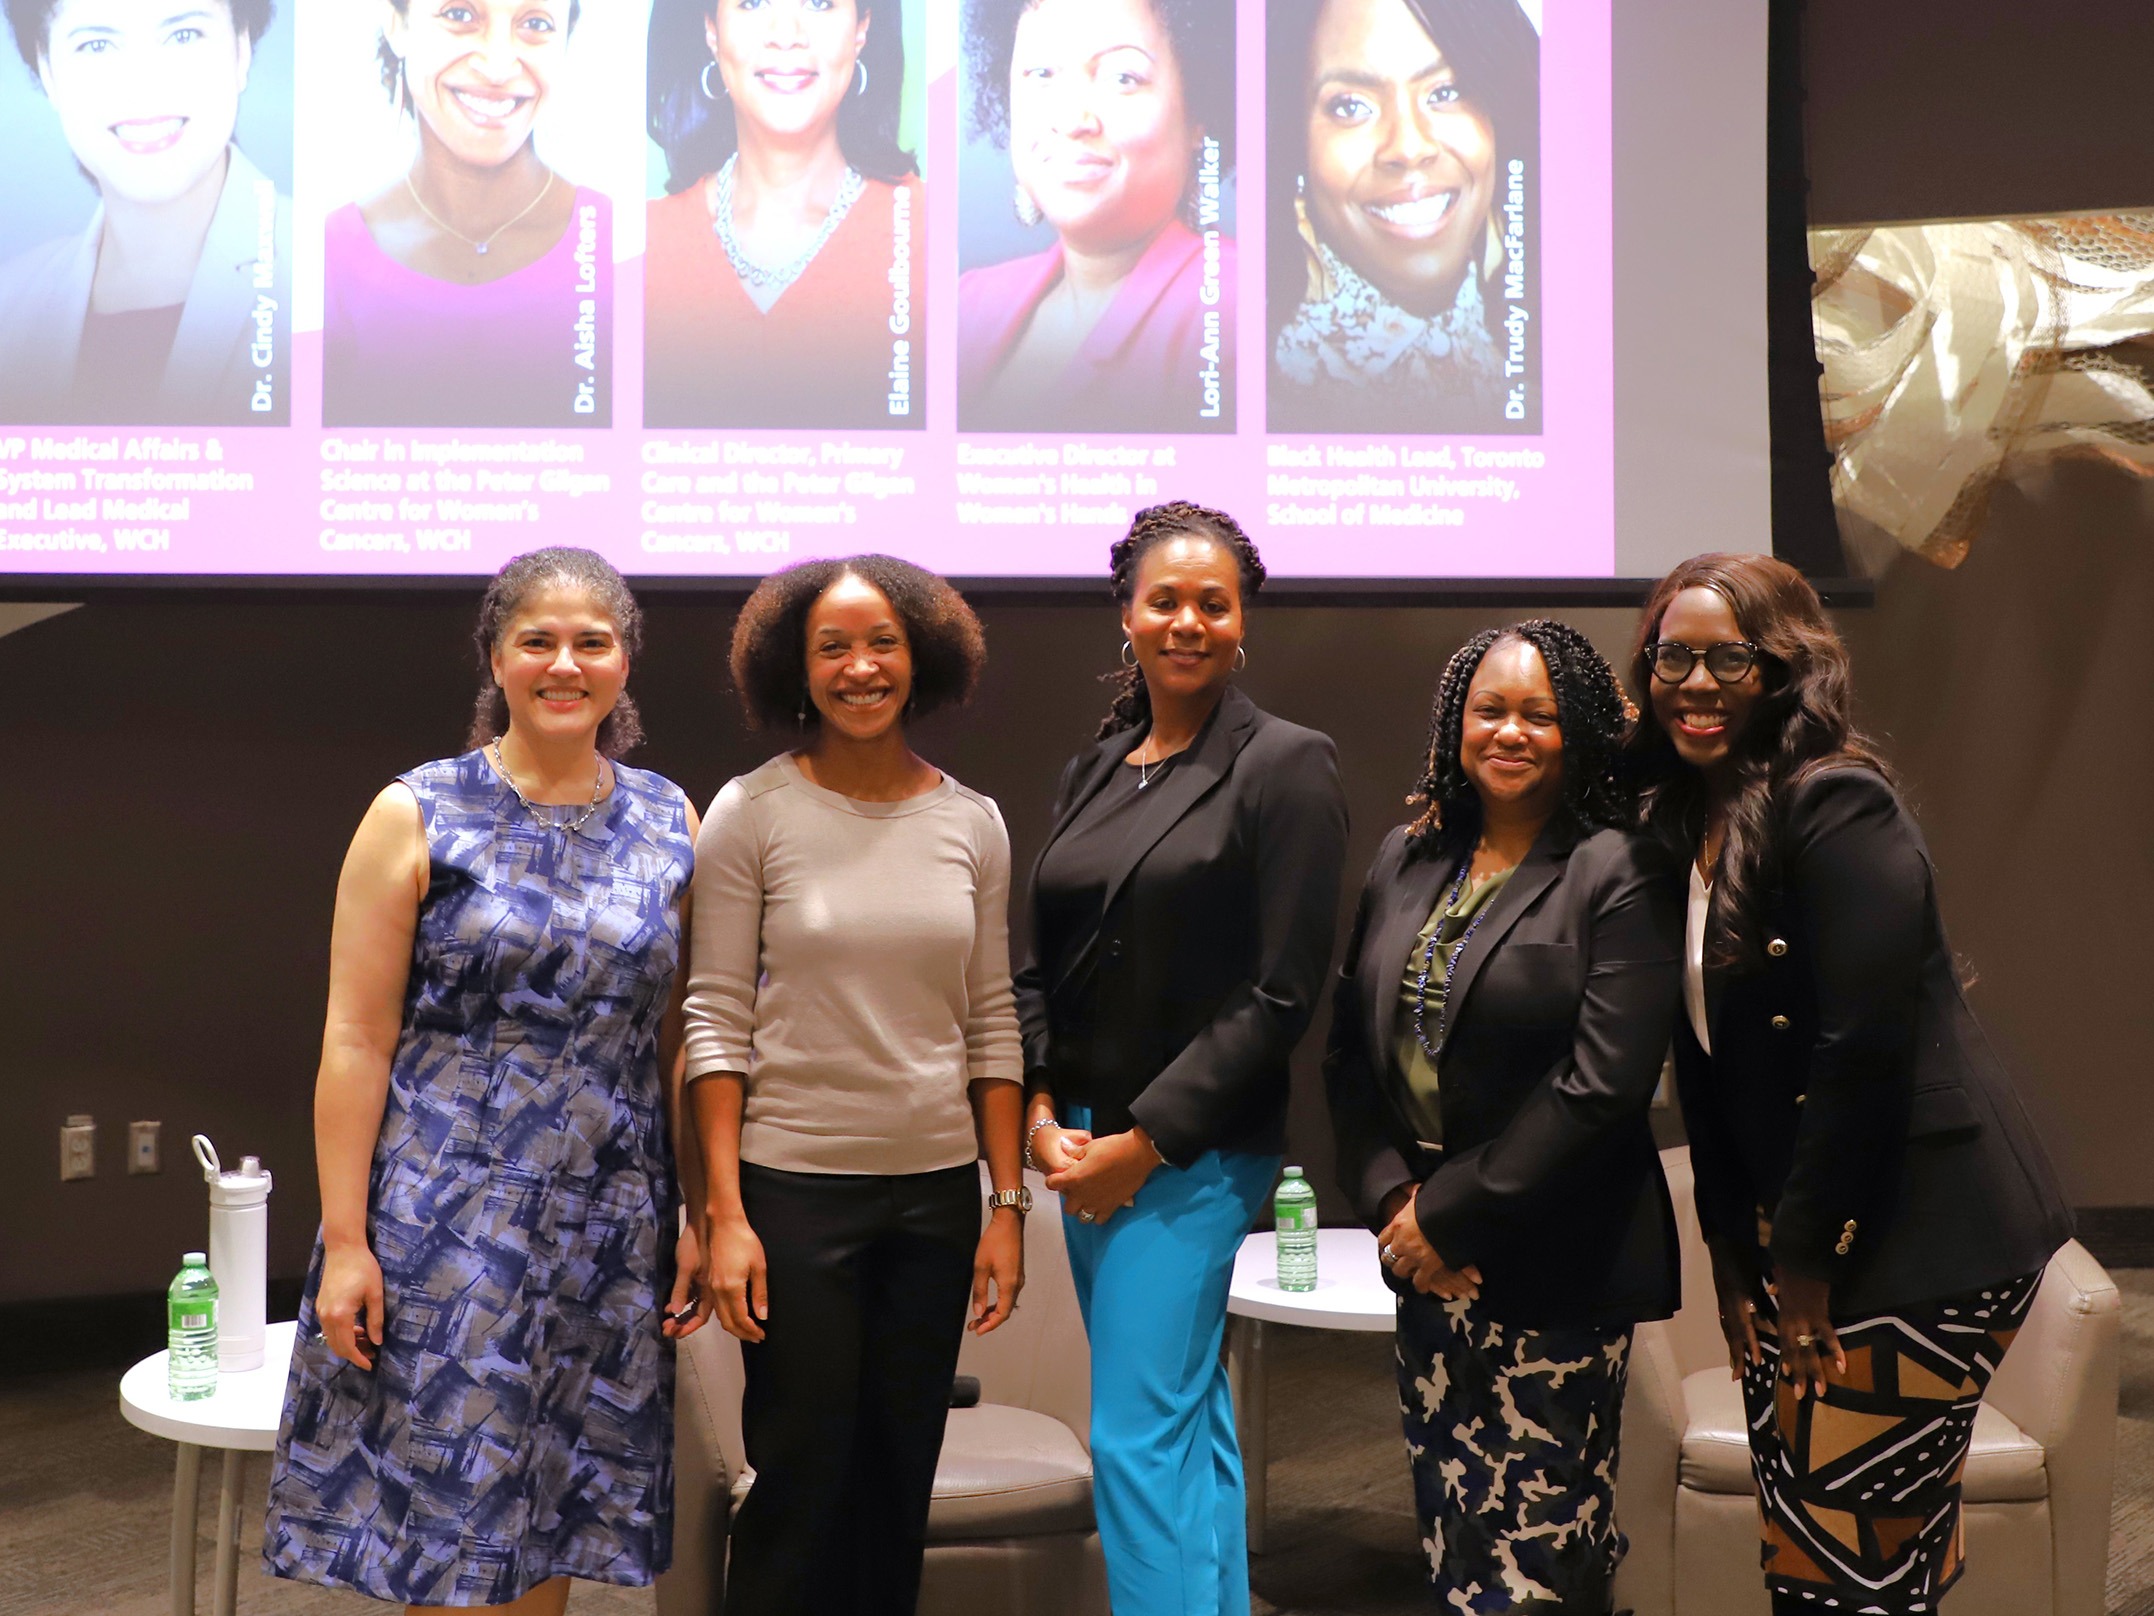 (left to right) Cindy Maxwell, Aisha Lofters, Elaine Goulbourne, Lori-Ann Green Walker & Trudy MacFarlane standing alongside each other smiling 